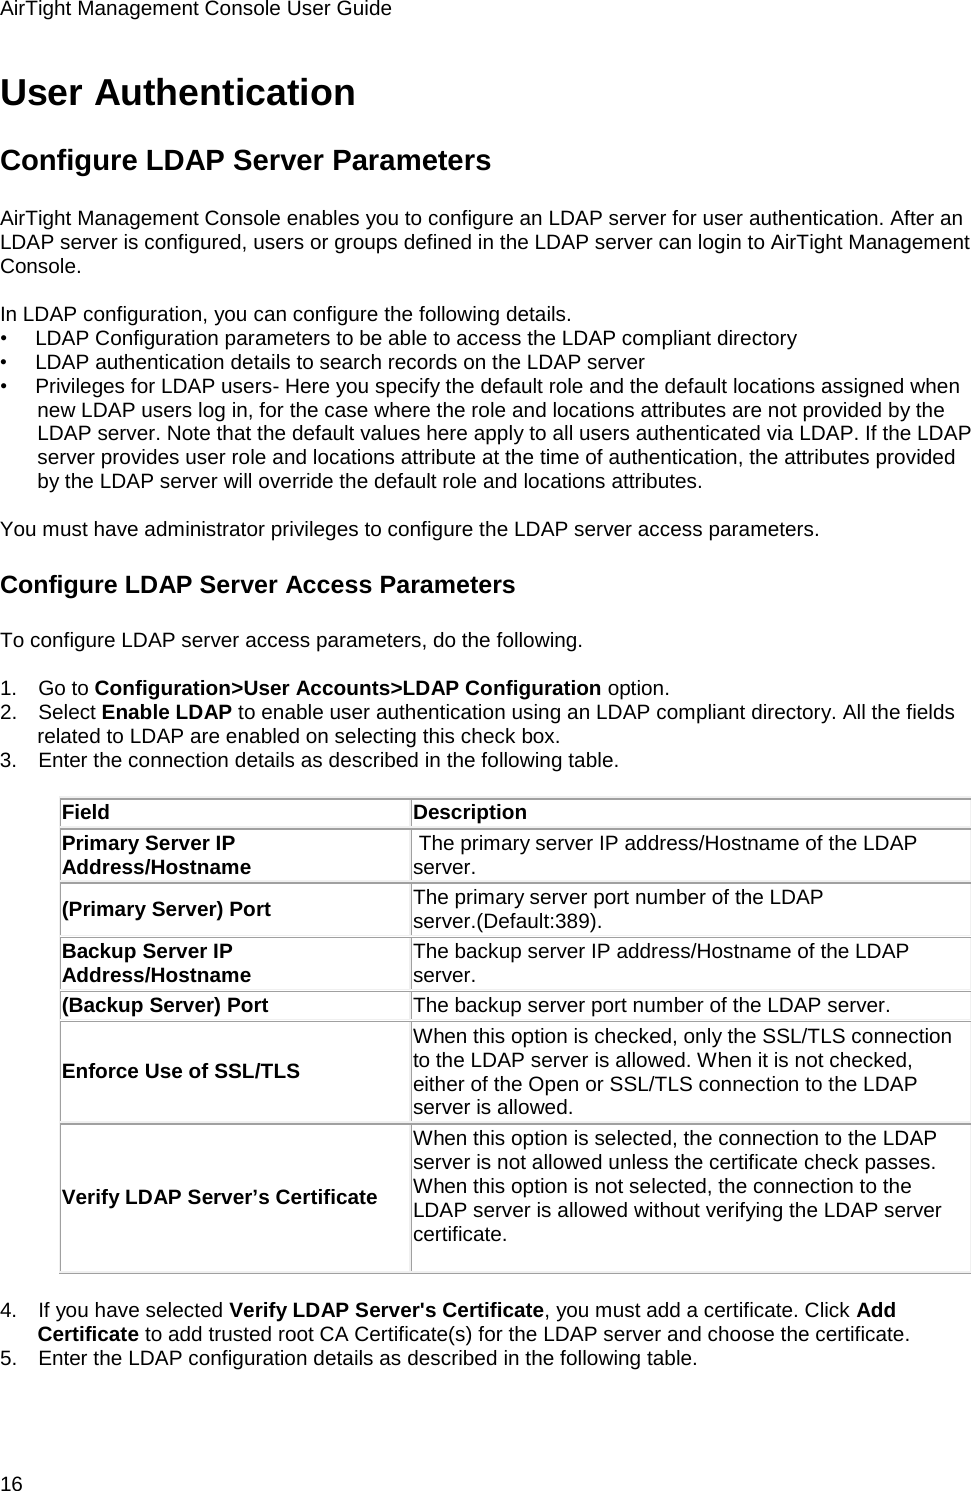 AirTight Management Console User Guide 16 User Authentication Configure LDAP Server Parameters AirTight Management Console enables you to configure an LDAP server for user authentication. After an LDAP server is configured, users or groups defined in the LDAP server can login to AirTight Management Console.    In LDAP configuration, you can configure the following details. •        LDAP Configuration parameters to be able to access the LDAP compliant directory •        LDAP authentication details to search records on the LDAP server •        Privileges for LDAP users- Here you specify the default role and the default locations assigned when new LDAP users log in, for the case where the role and locations attributes are not provided by the LDAP server. Note that the default values here apply to all users authenticated via LDAP. If the LDAP server provides user role and locations attribute at the time of authentication, the attributes provided by the LDAP server will override the default role and locations attributes.   You must have administrator privileges to configure the LDAP server access parameters. Configure LDAP Server Access Parameters To configure LDAP server access parameters, do the following.   1.      Go to Configuration&gt;User Accounts&gt;LDAP Configuration option. 2.      Select Enable LDAP to enable user authentication using an LDAP compliant directory. All the fields related to LDAP are enabled on selecting this check box. 3.      Enter the connection details as described in the following table.   Field Description Primary Server IP Address/Hostname  The primary server IP address/Hostname of the LDAP server. (Primary Server) Port  The primary server port number of the LDAP server.(Default:389). Backup Server IP Address/Hostname The backup server IP address/Hostname of the LDAP server. (Backup Server) Port The backup server port number of the LDAP server. Enforce Use of SSL/TLS When this option is checked, only the SSL/TLS connection to the LDAP server is allowed. When it is not checked, either of the Open or SSL/TLS connection to the LDAP server is allowed. Verify LDAP Server’s Certificate When this option is selected, the connection to the LDAP server is not allowed unless the certificate check passes. When this option is not selected, the connection to the LDAP server is allowed without verifying the LDAP server certificate.     4.      If you have selected Verify LDAP Server&apos;s Certificate, you must add a certificate. Click Add Certificate to add trusted root CA Certificate(s) for the LDAP server and choose the certificate. 5.      Enter the LDAP configuration details as described in the following table.   